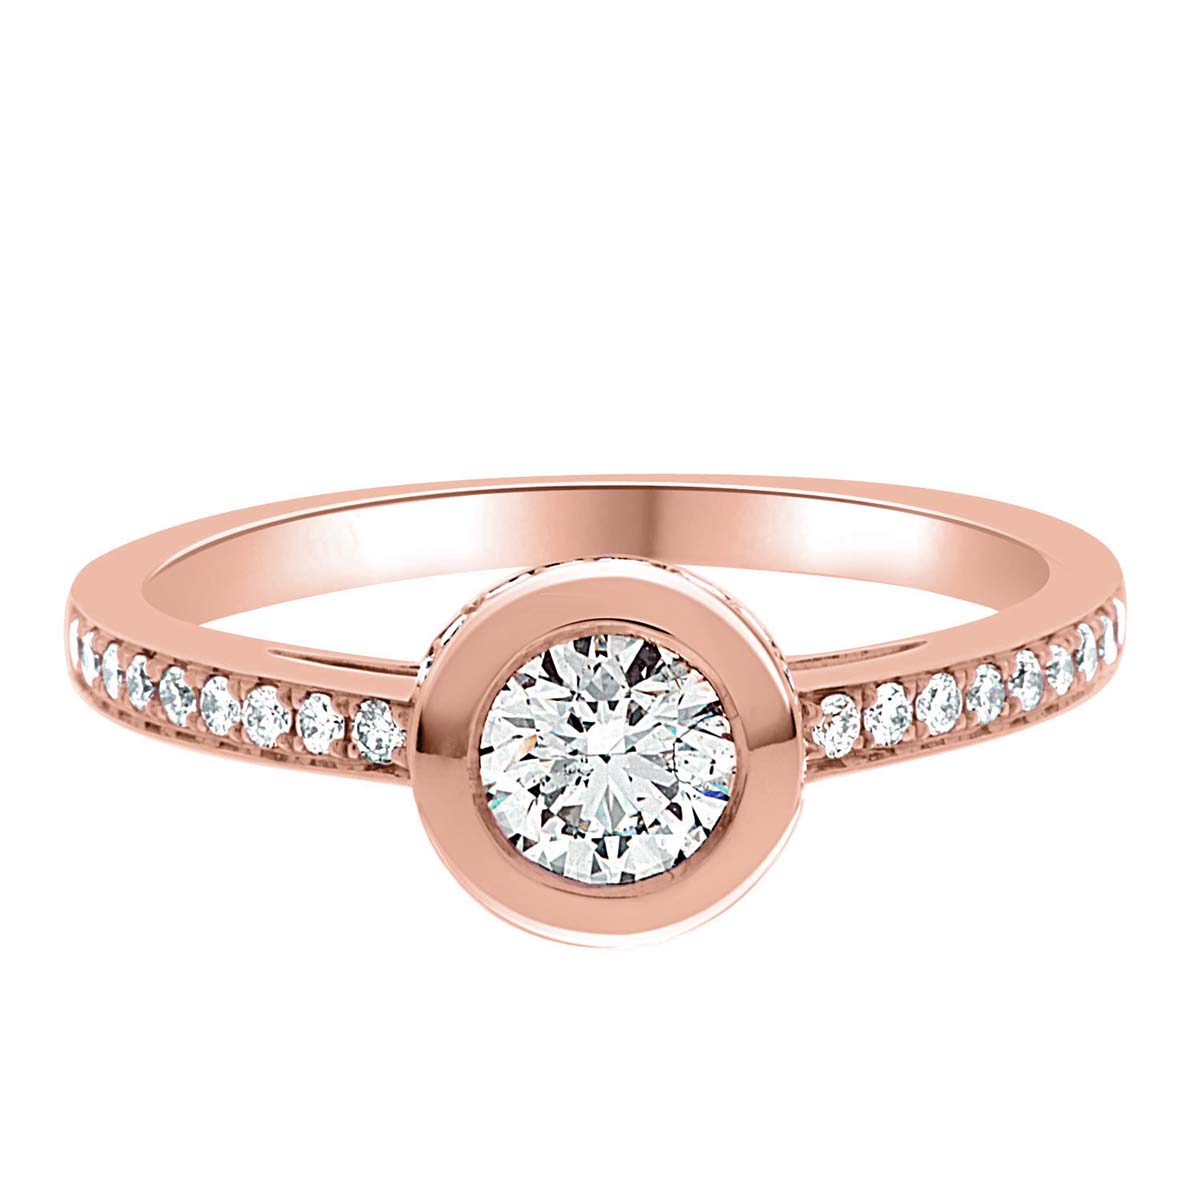 Bezel Engagement Ring made of Red gold and diamonds, laying flat, with a white background